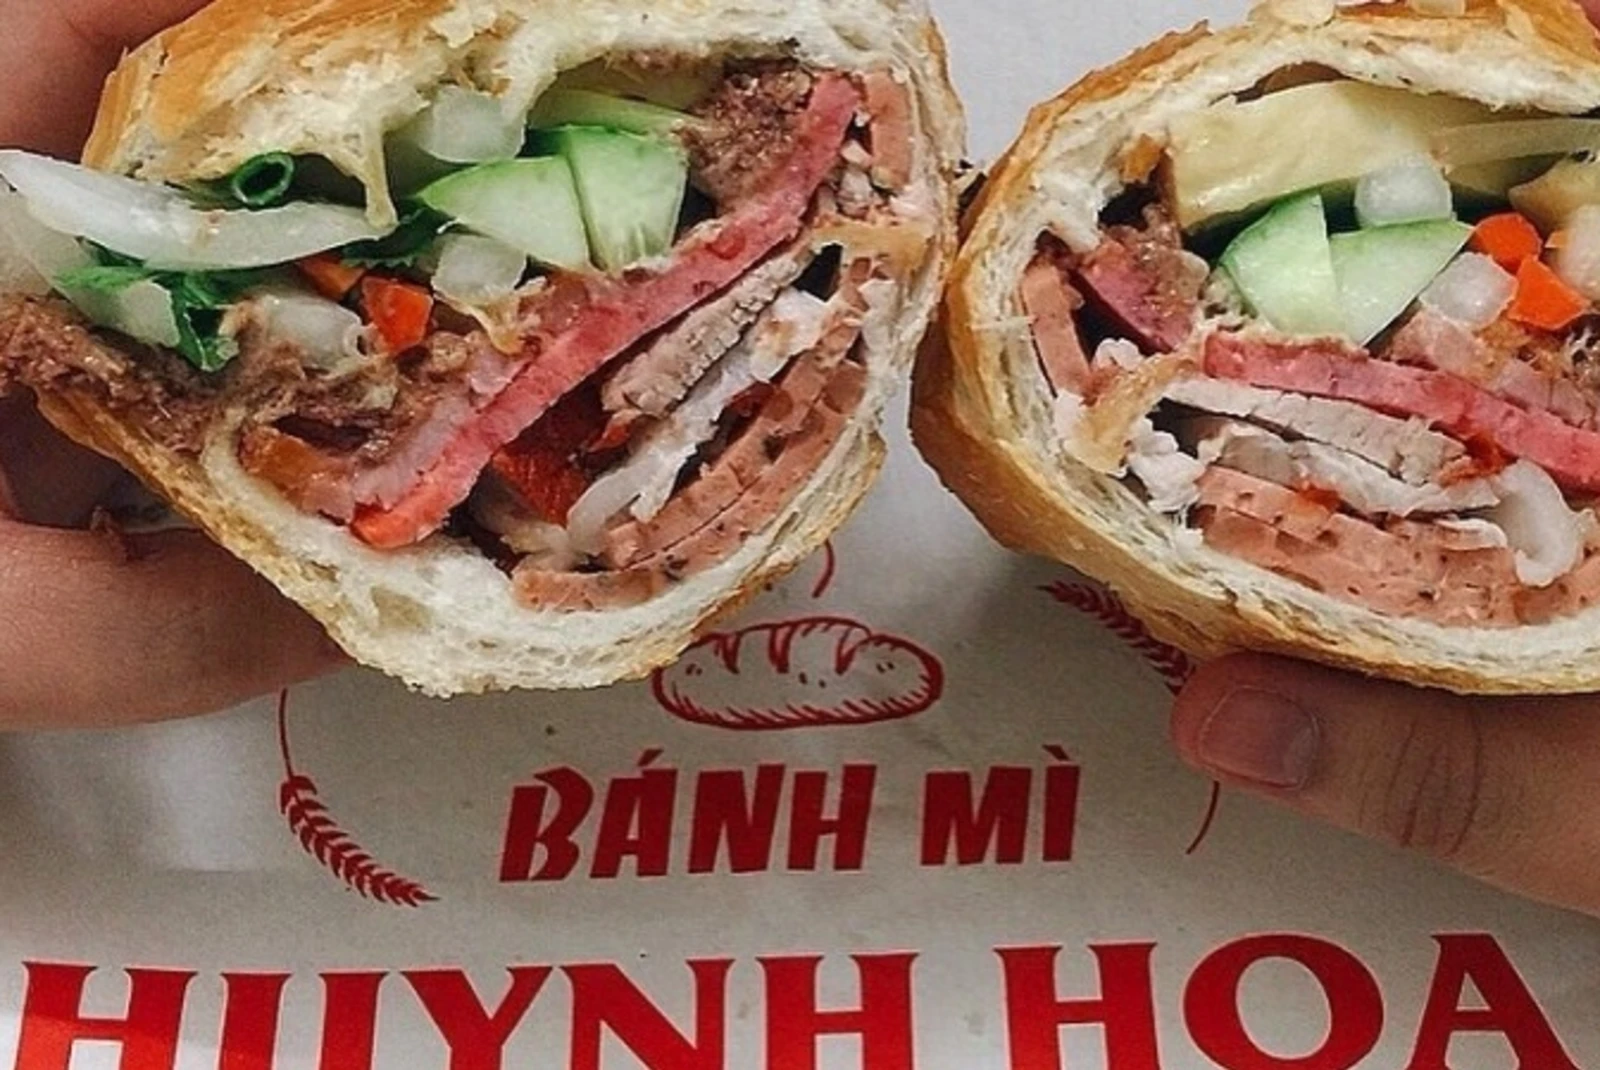 Banh mi is the classic Vietnamese sandwich loaded with lots of extra cold cuts, cooked meats, pickles, and sauces.
